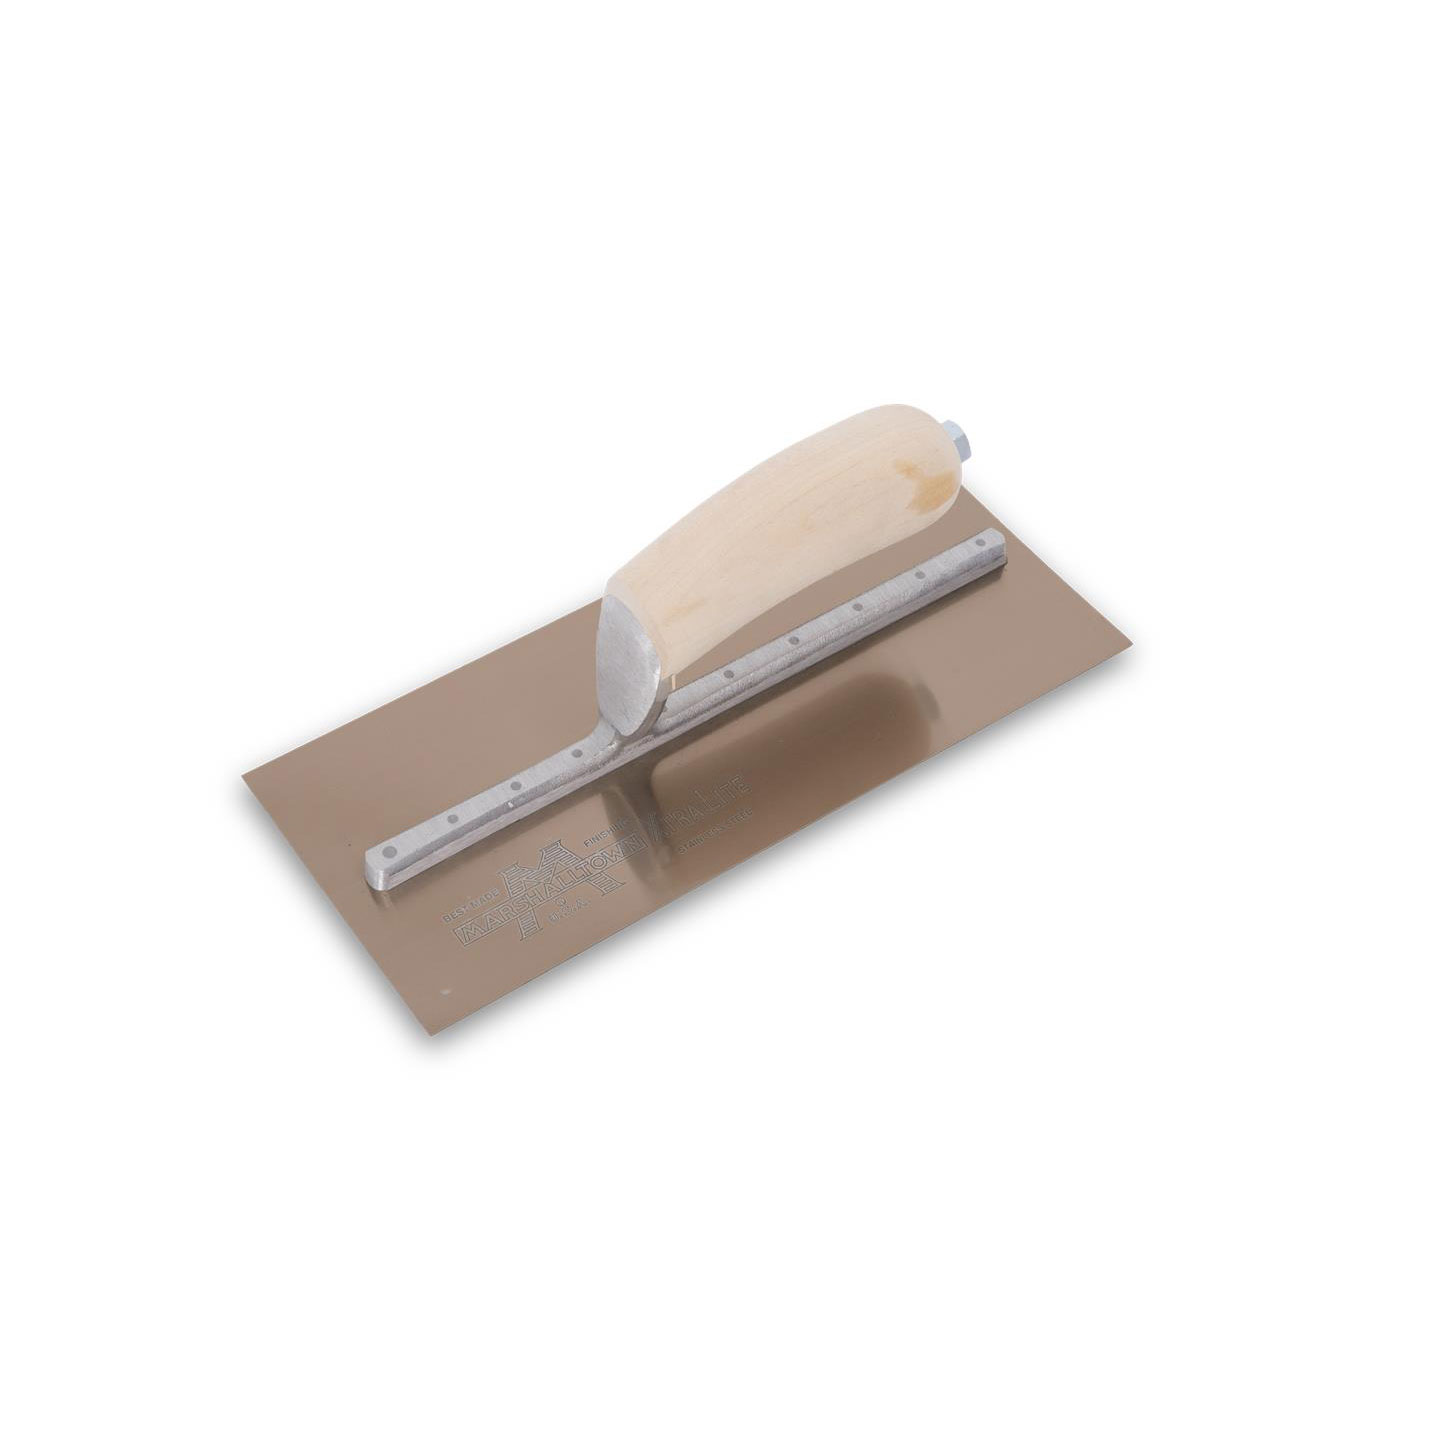 Marshalltown MXS81GS 18in x 4in Golden Stainless Finishing Trowel with Curved Wood Handle MXS81GS